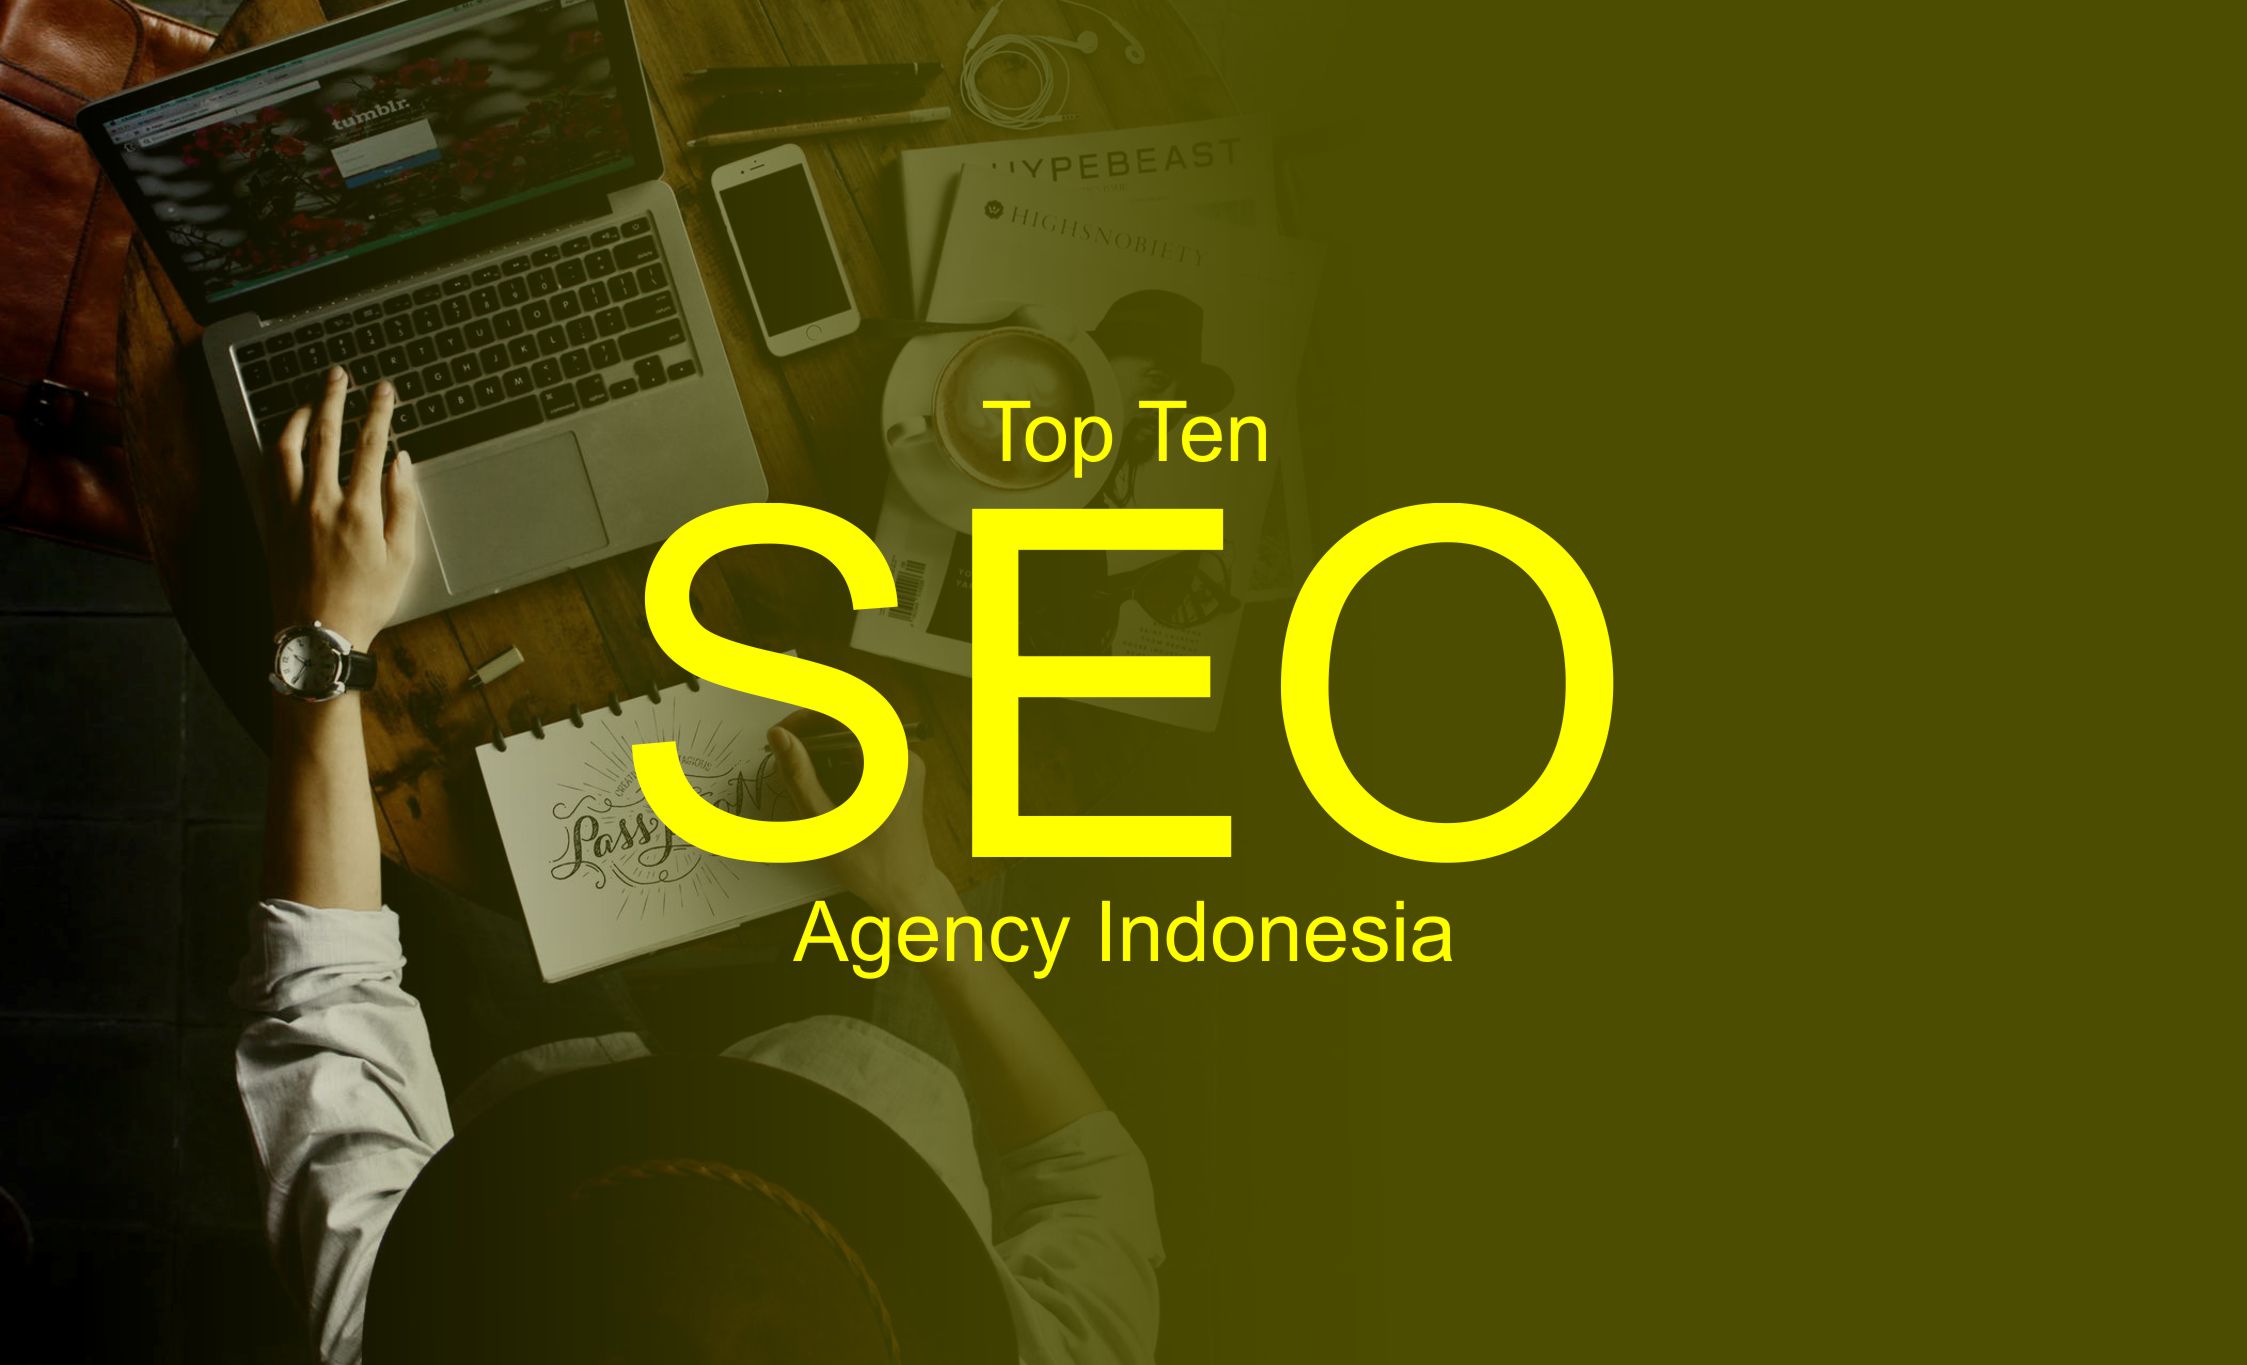 Top Ten SEO Agency Indonesia Right Now